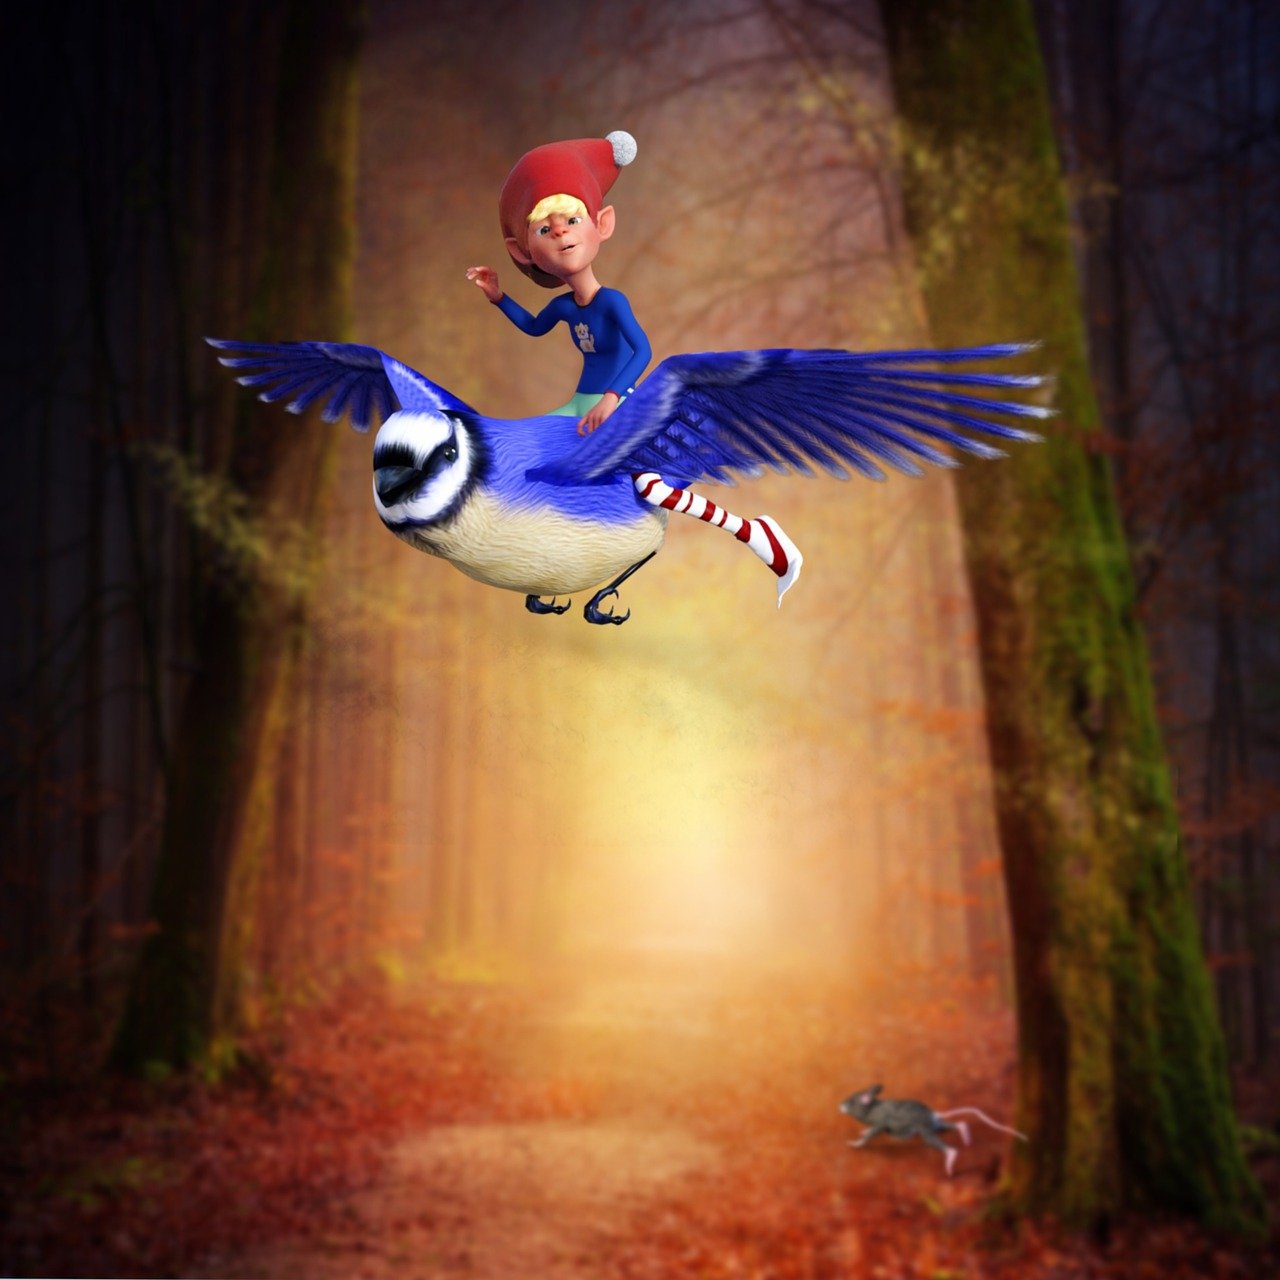 a bird that is flying in the air, a storybook illustration, inspired by Alison Kinnaird, conceptual art, with 3d render, woodland backround, holiday season, commercial photo